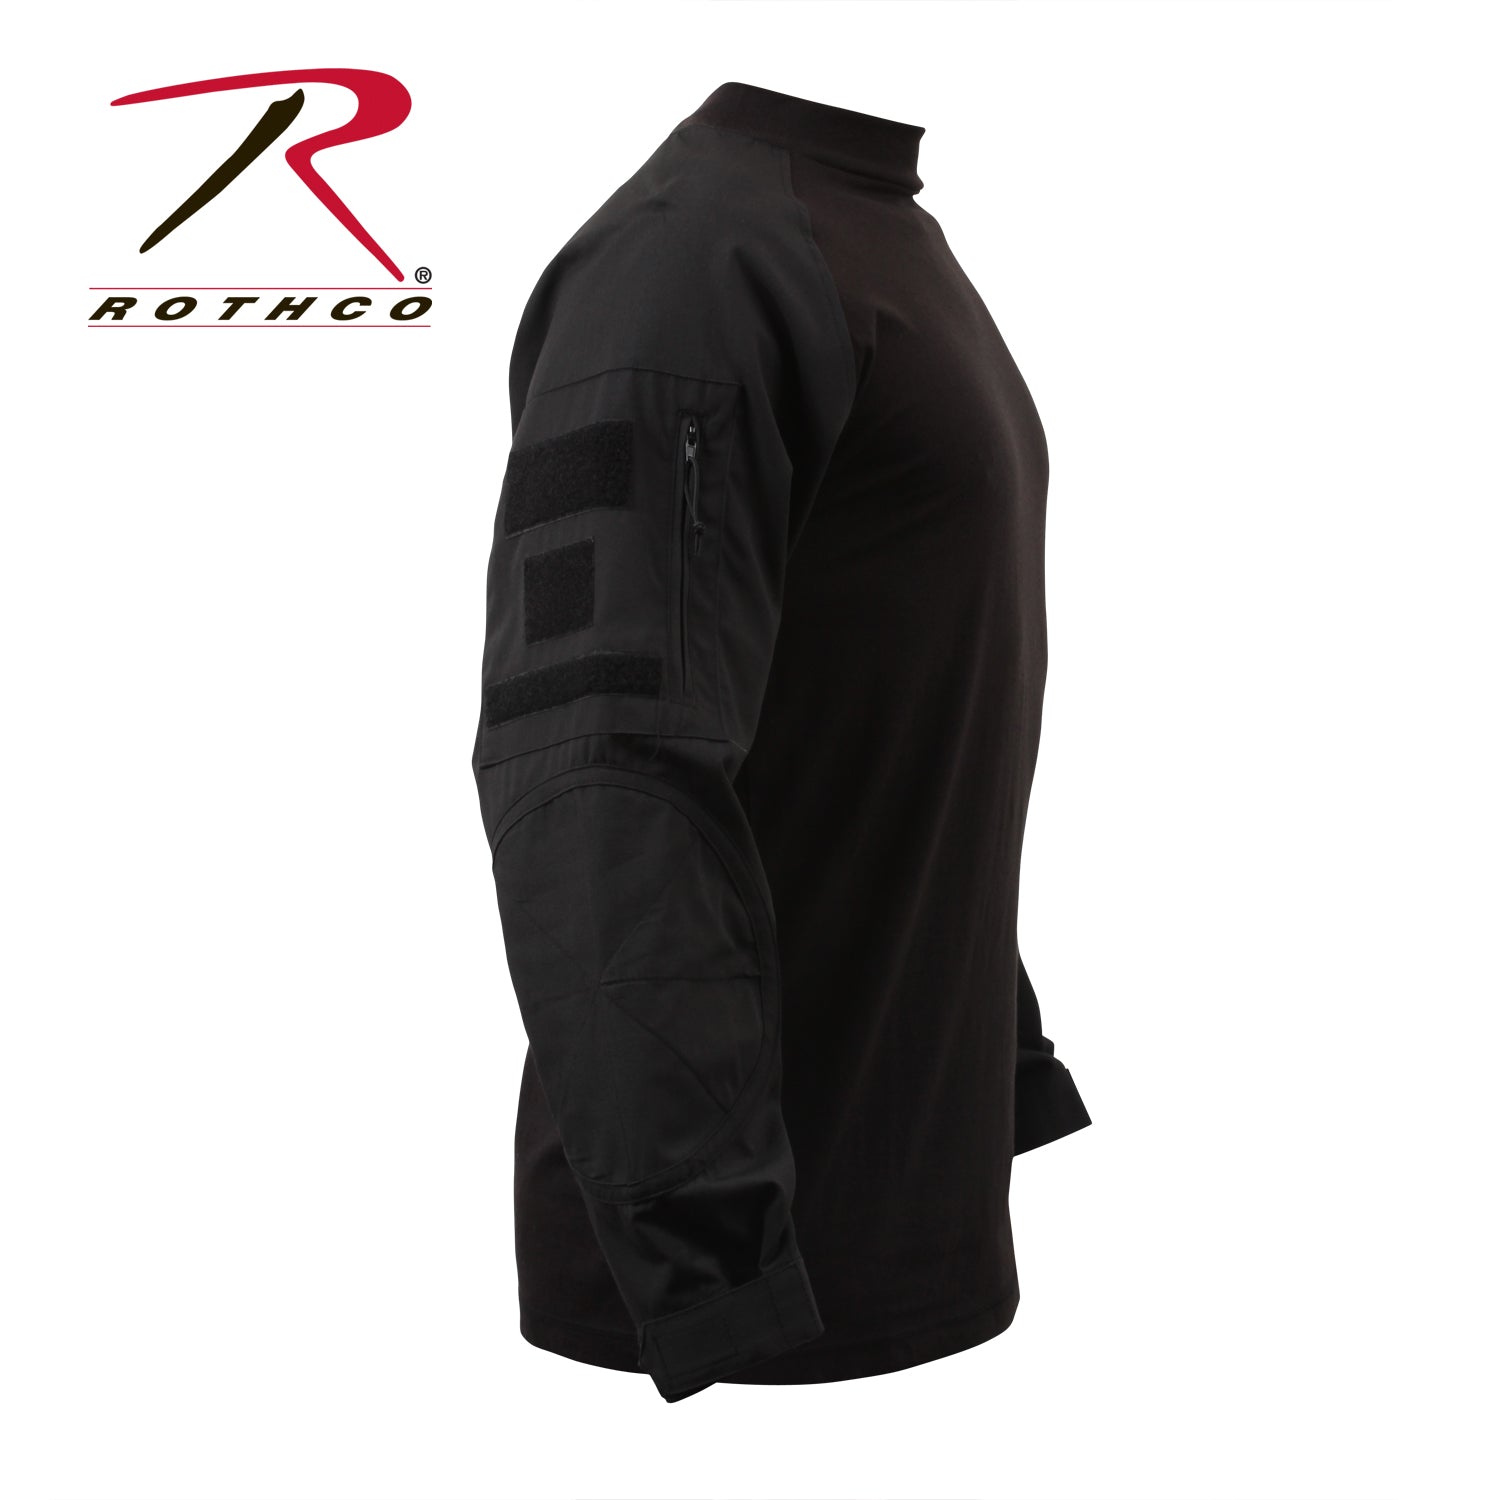 Rothco Military NYCO FR Fire Retardant Combat Shirt - Black - Eminent Paintball And Airsoft